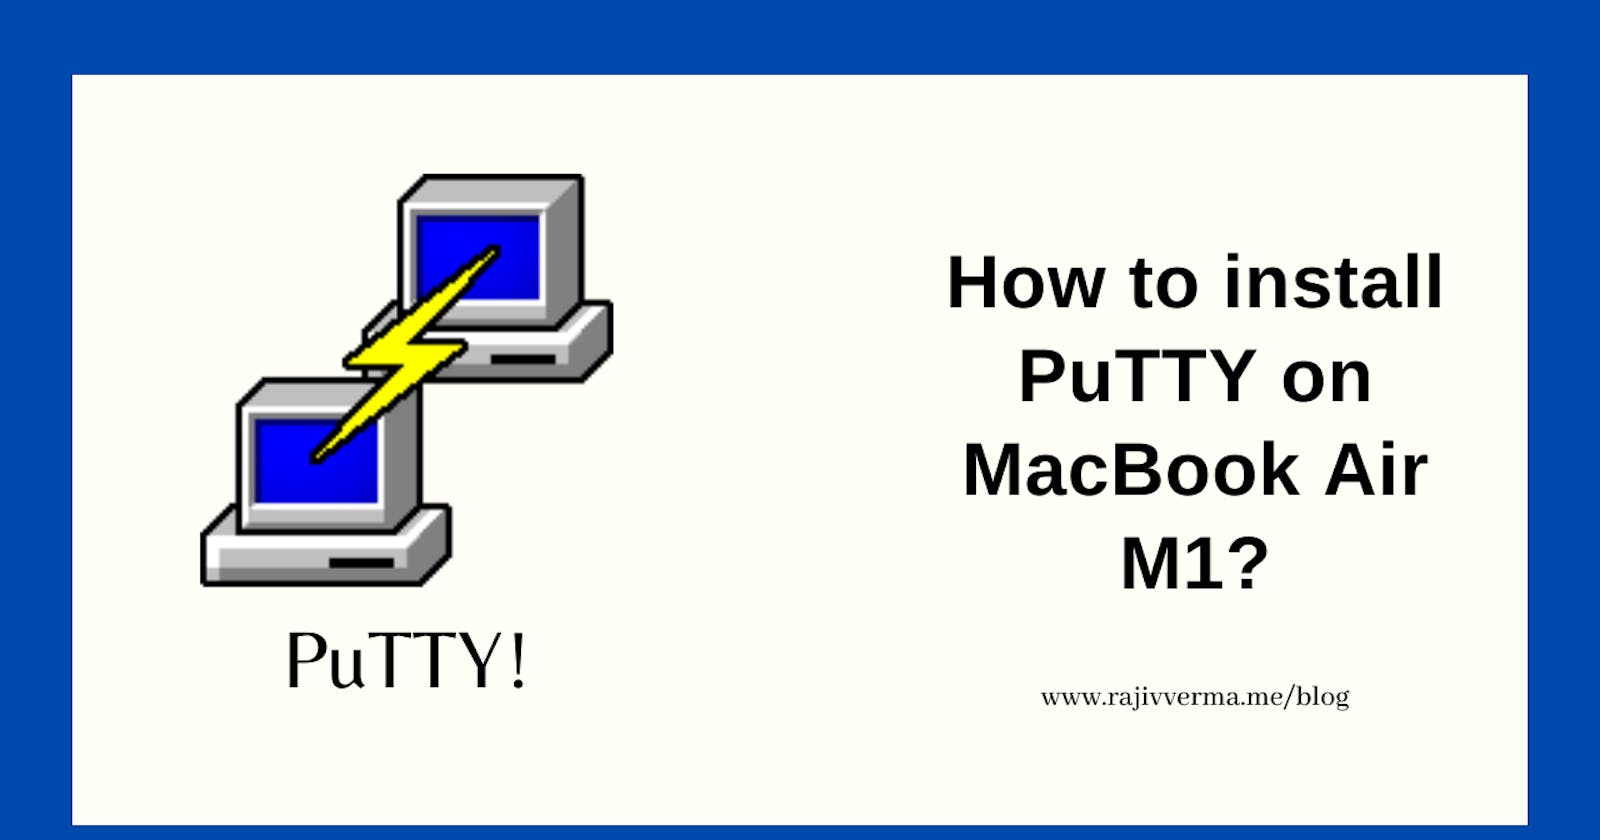 How To Install PuTTY On MacBook Air M1?